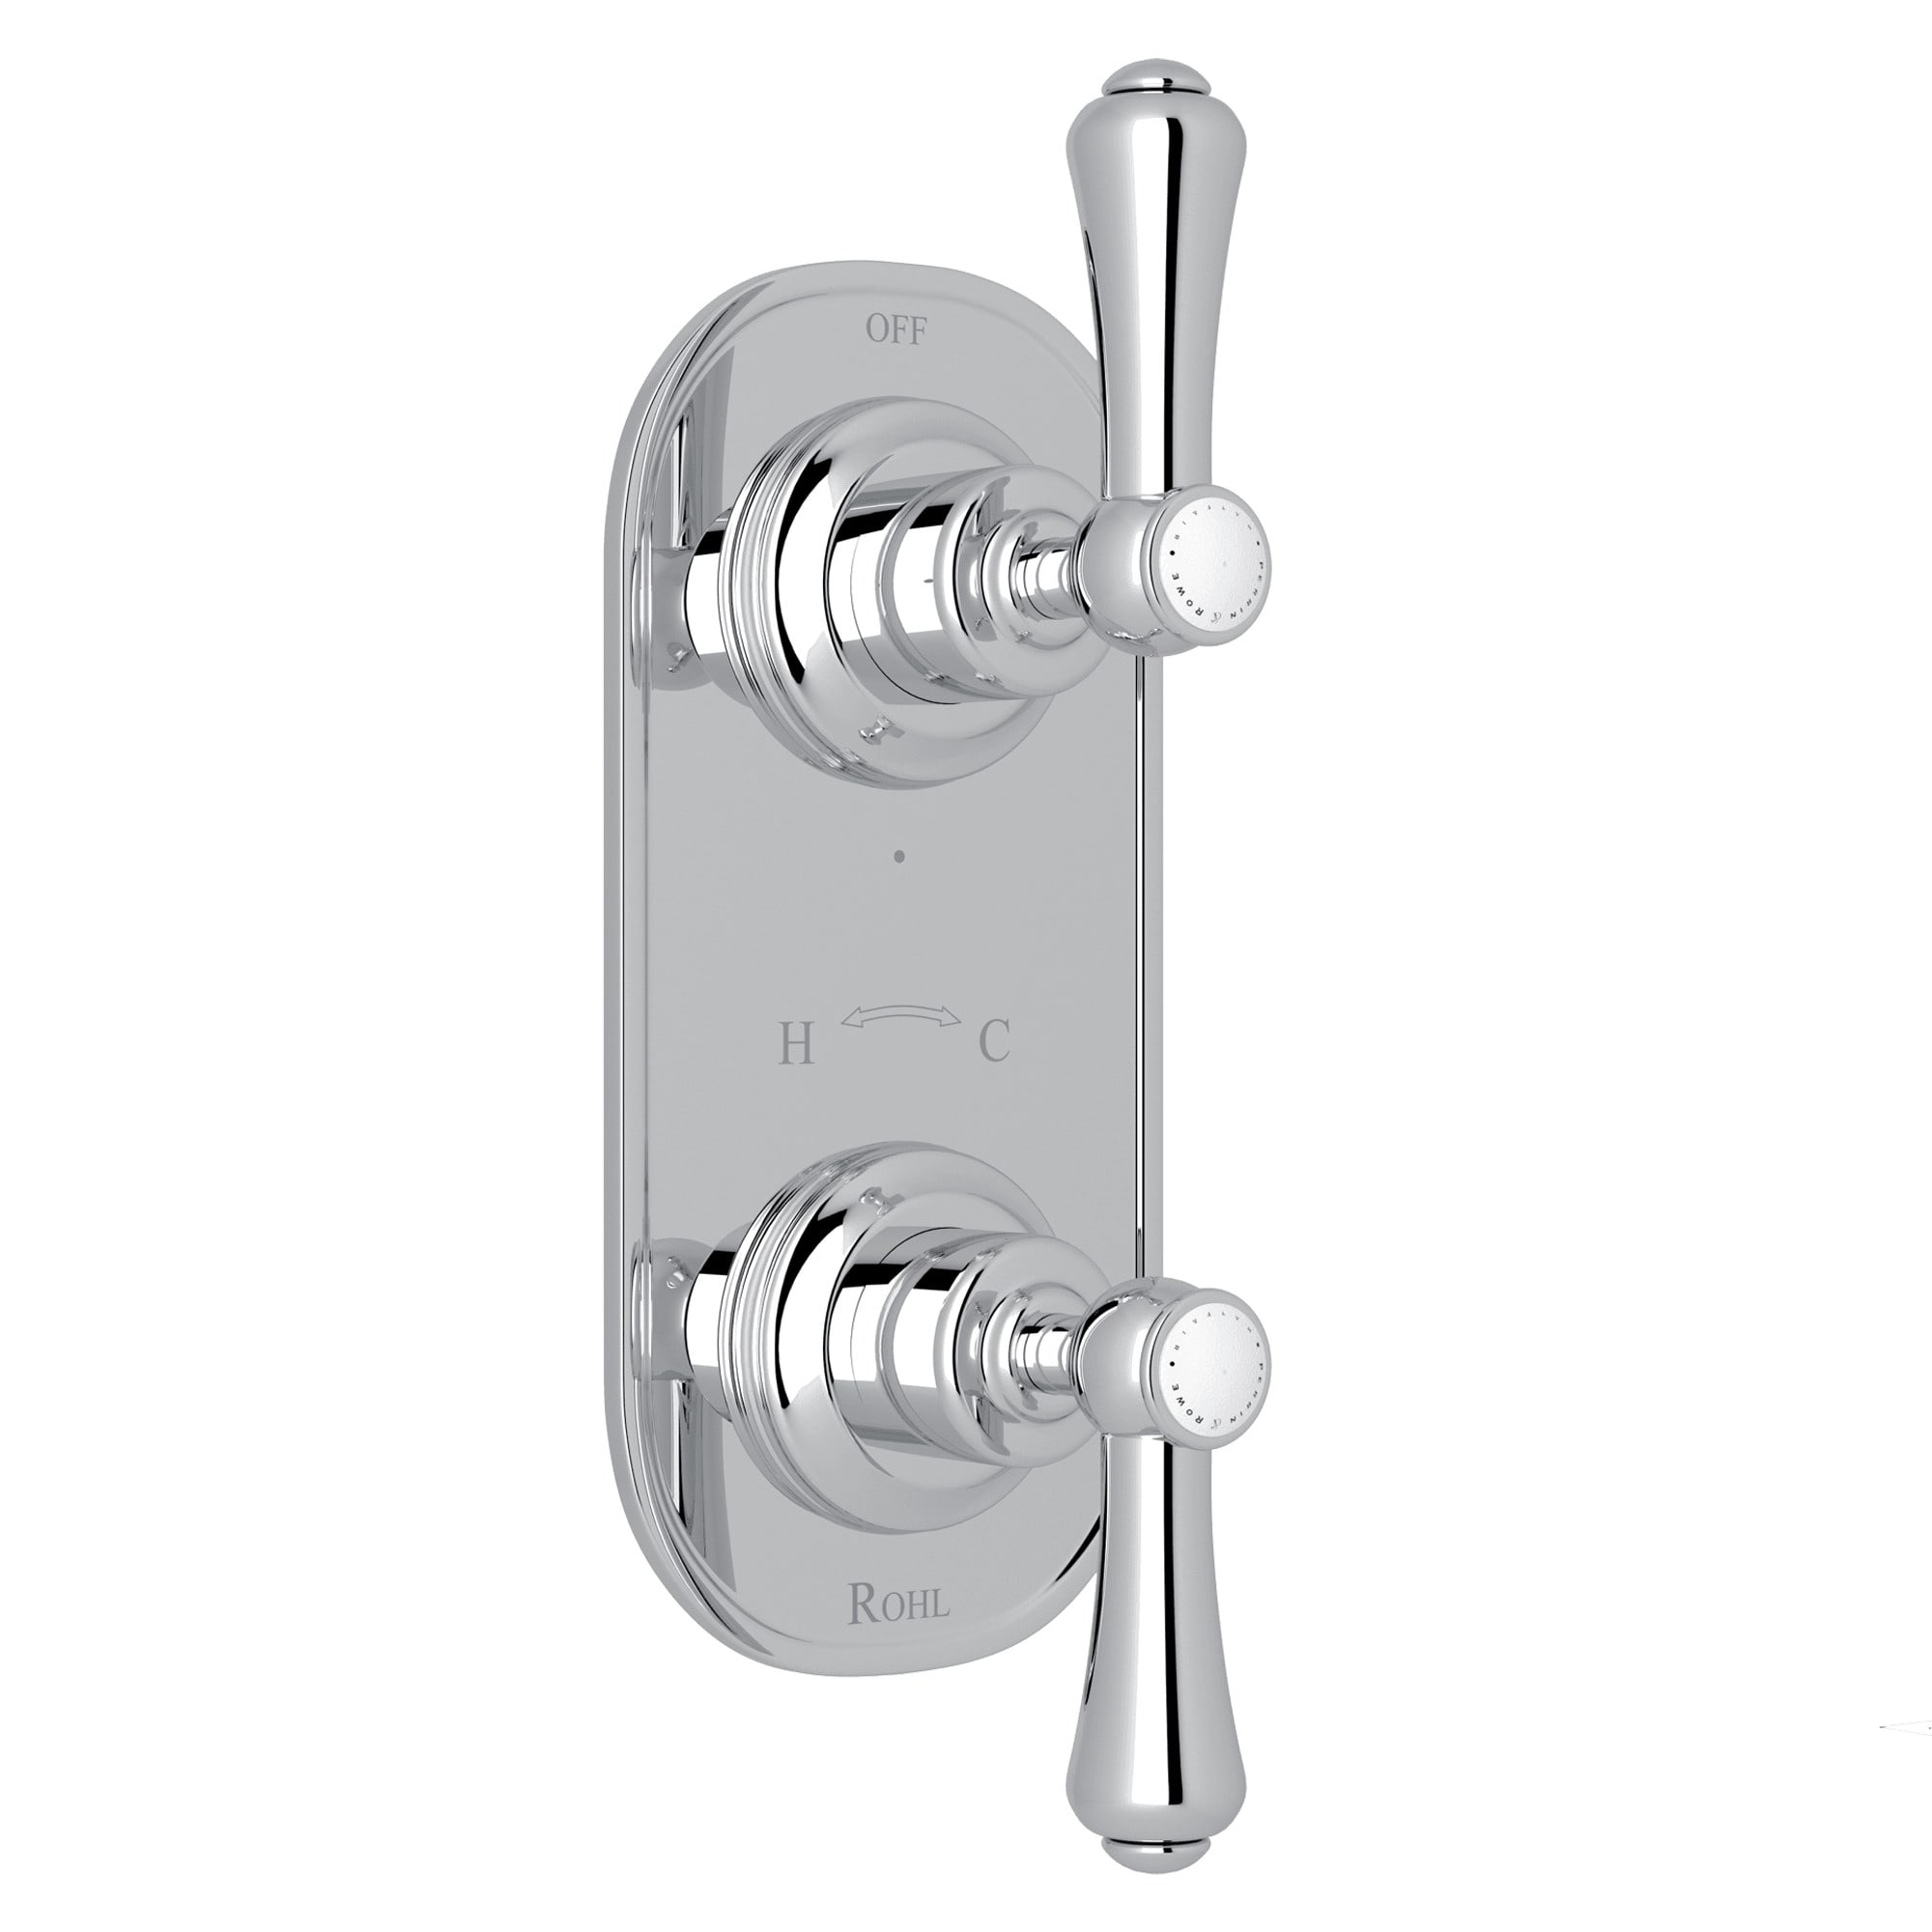 Rohl Perrin & Rowe Georgian Era Wall Diverter Valve Trim Only in Polished Nickel 